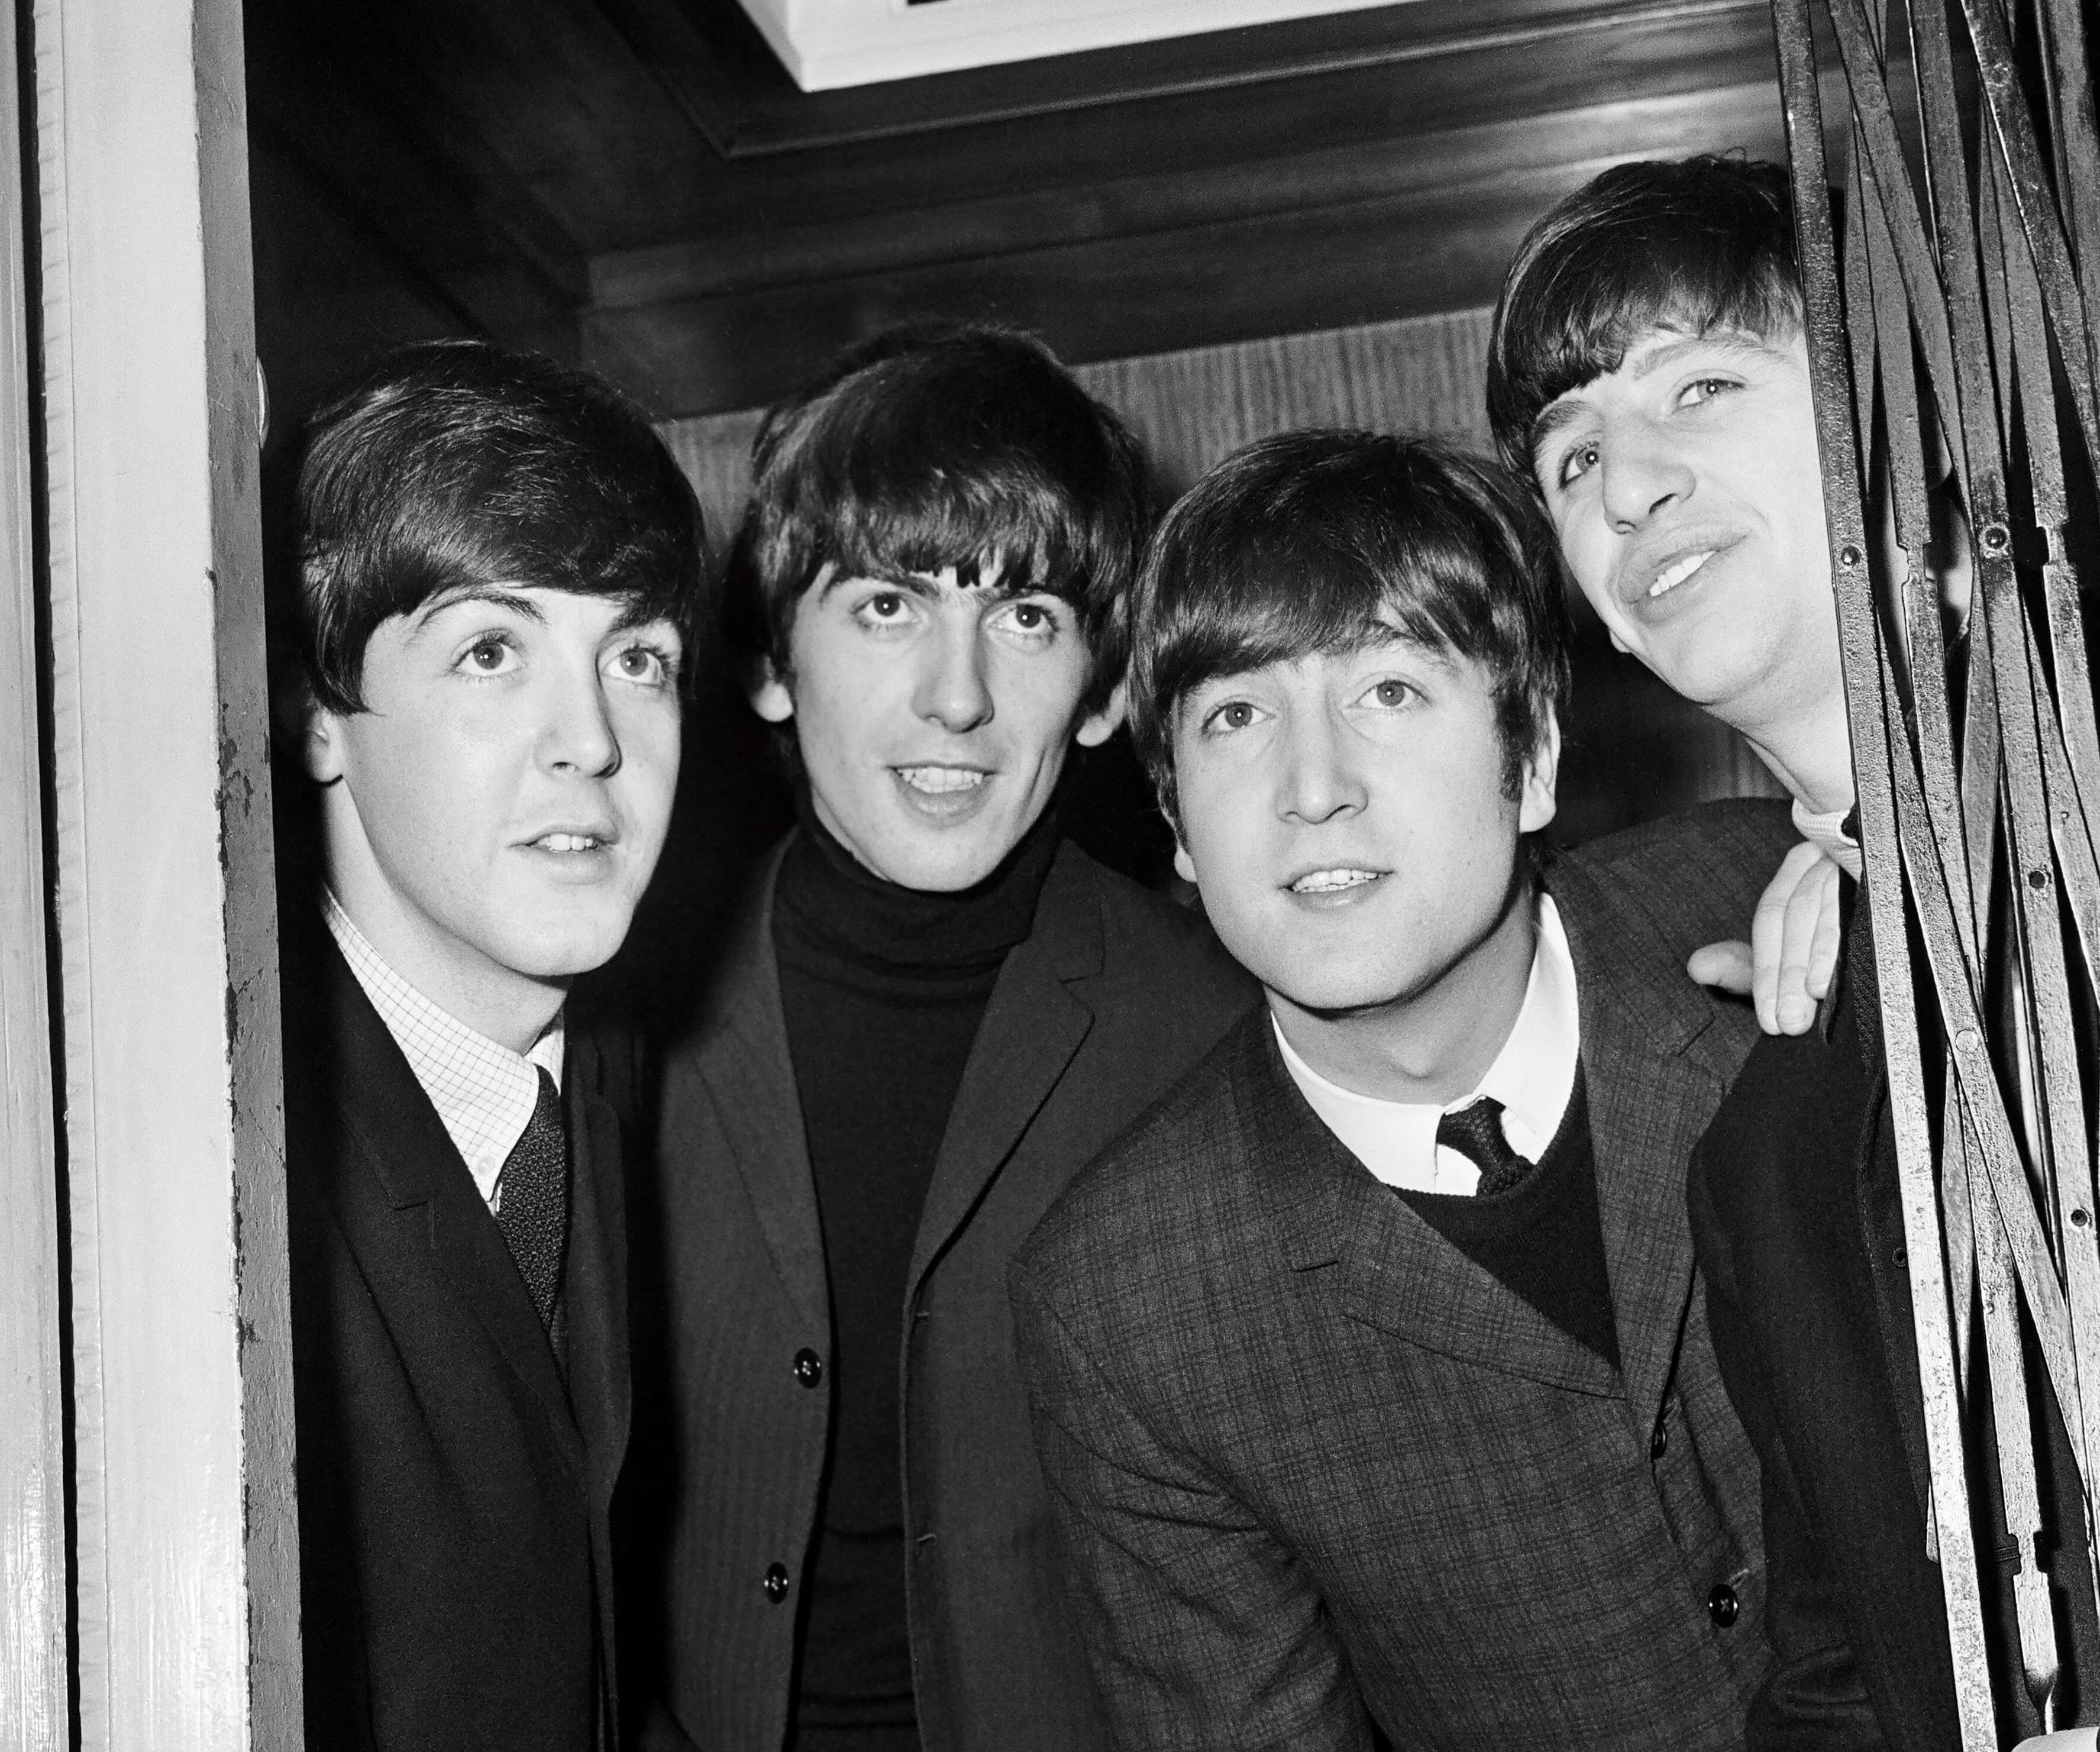 "Money (That's What I Want" era Beatles in an elevator